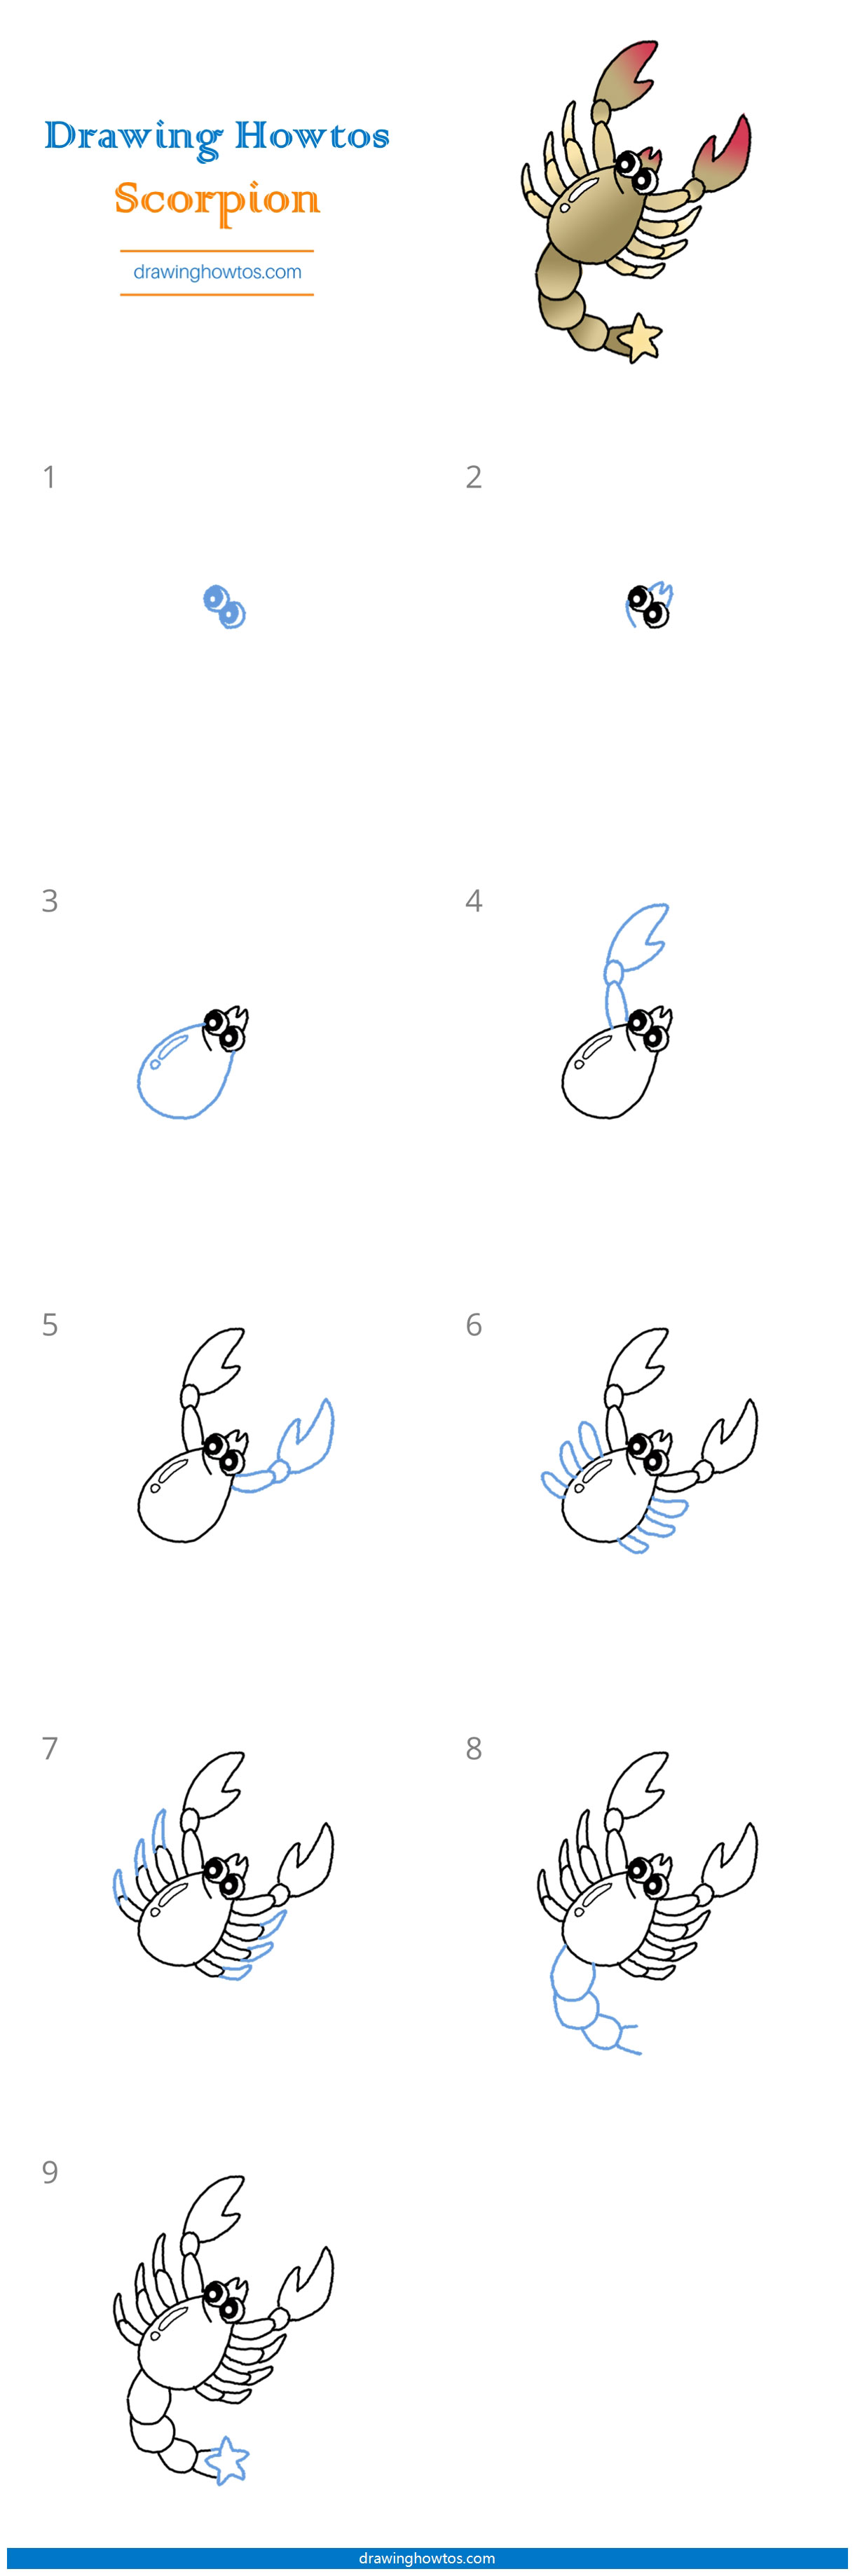 How to Draw a Scorpion Step by Step